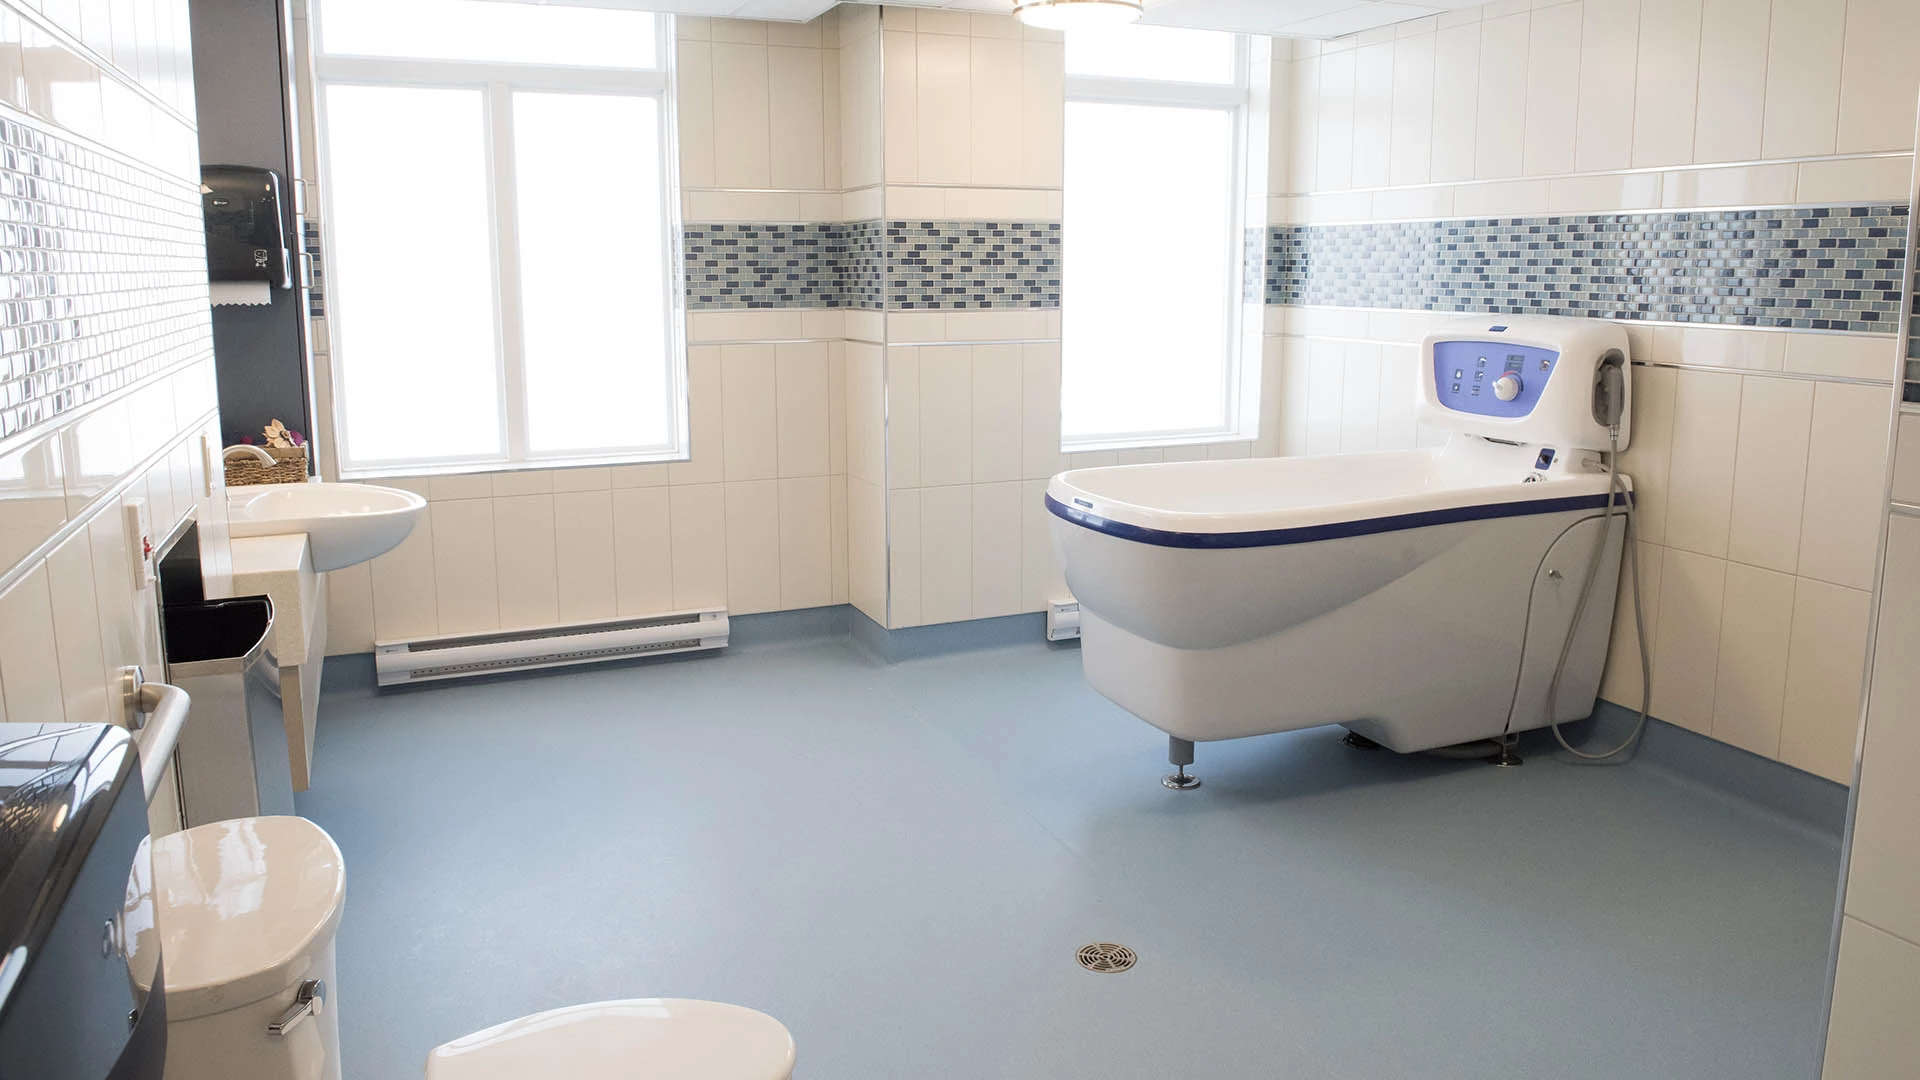 Bathroom with Safety features at MacTaggart Place senior housing